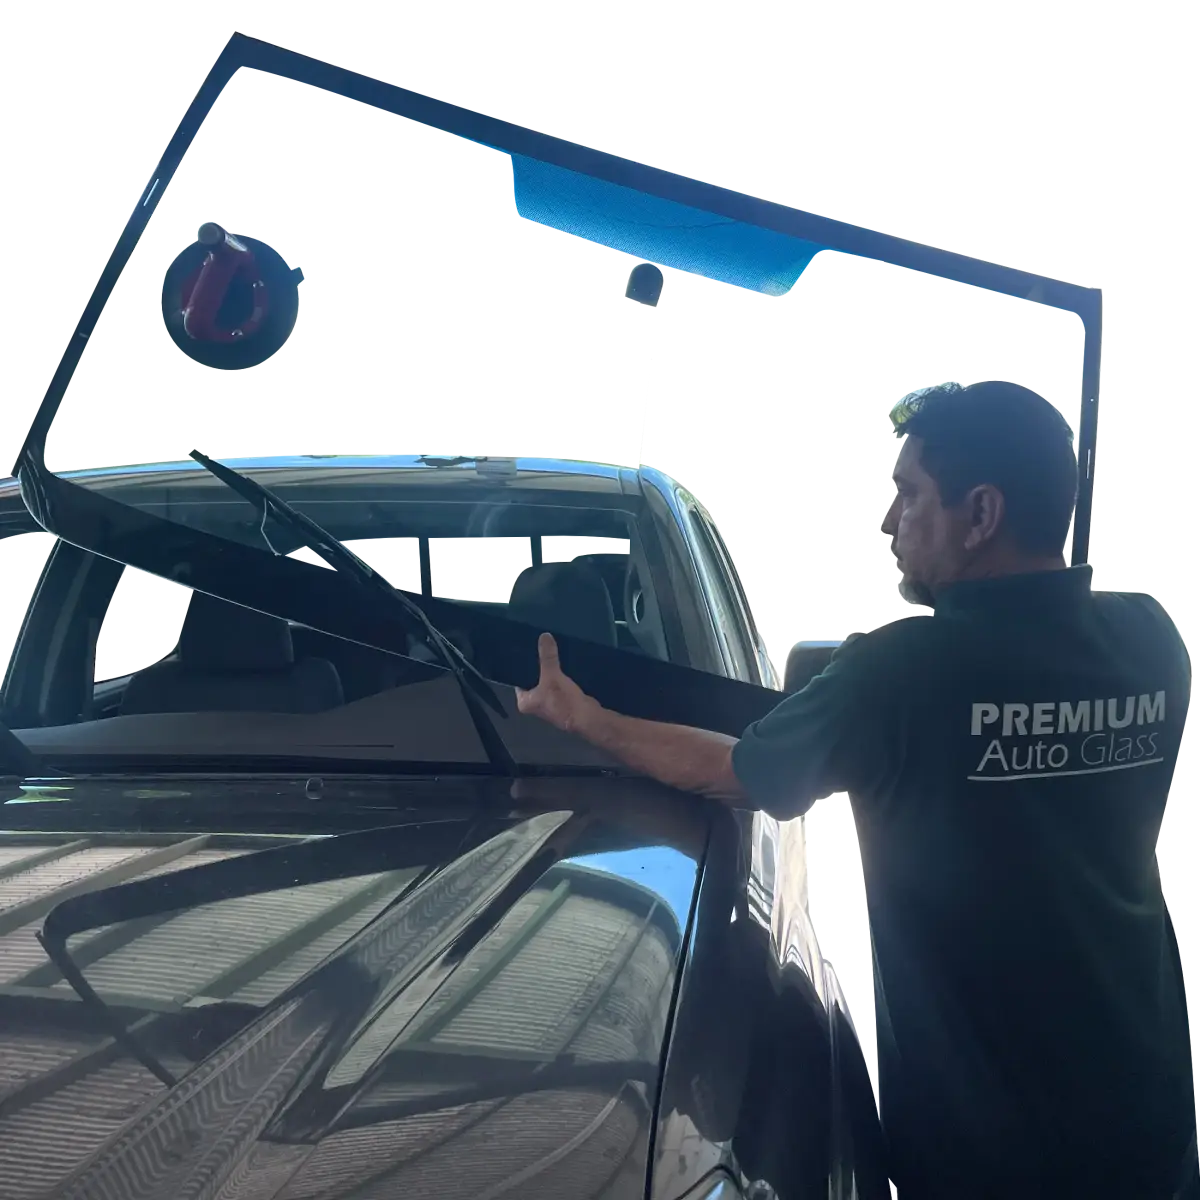 Auto glass installer holding windshield in front of a pickup truck.